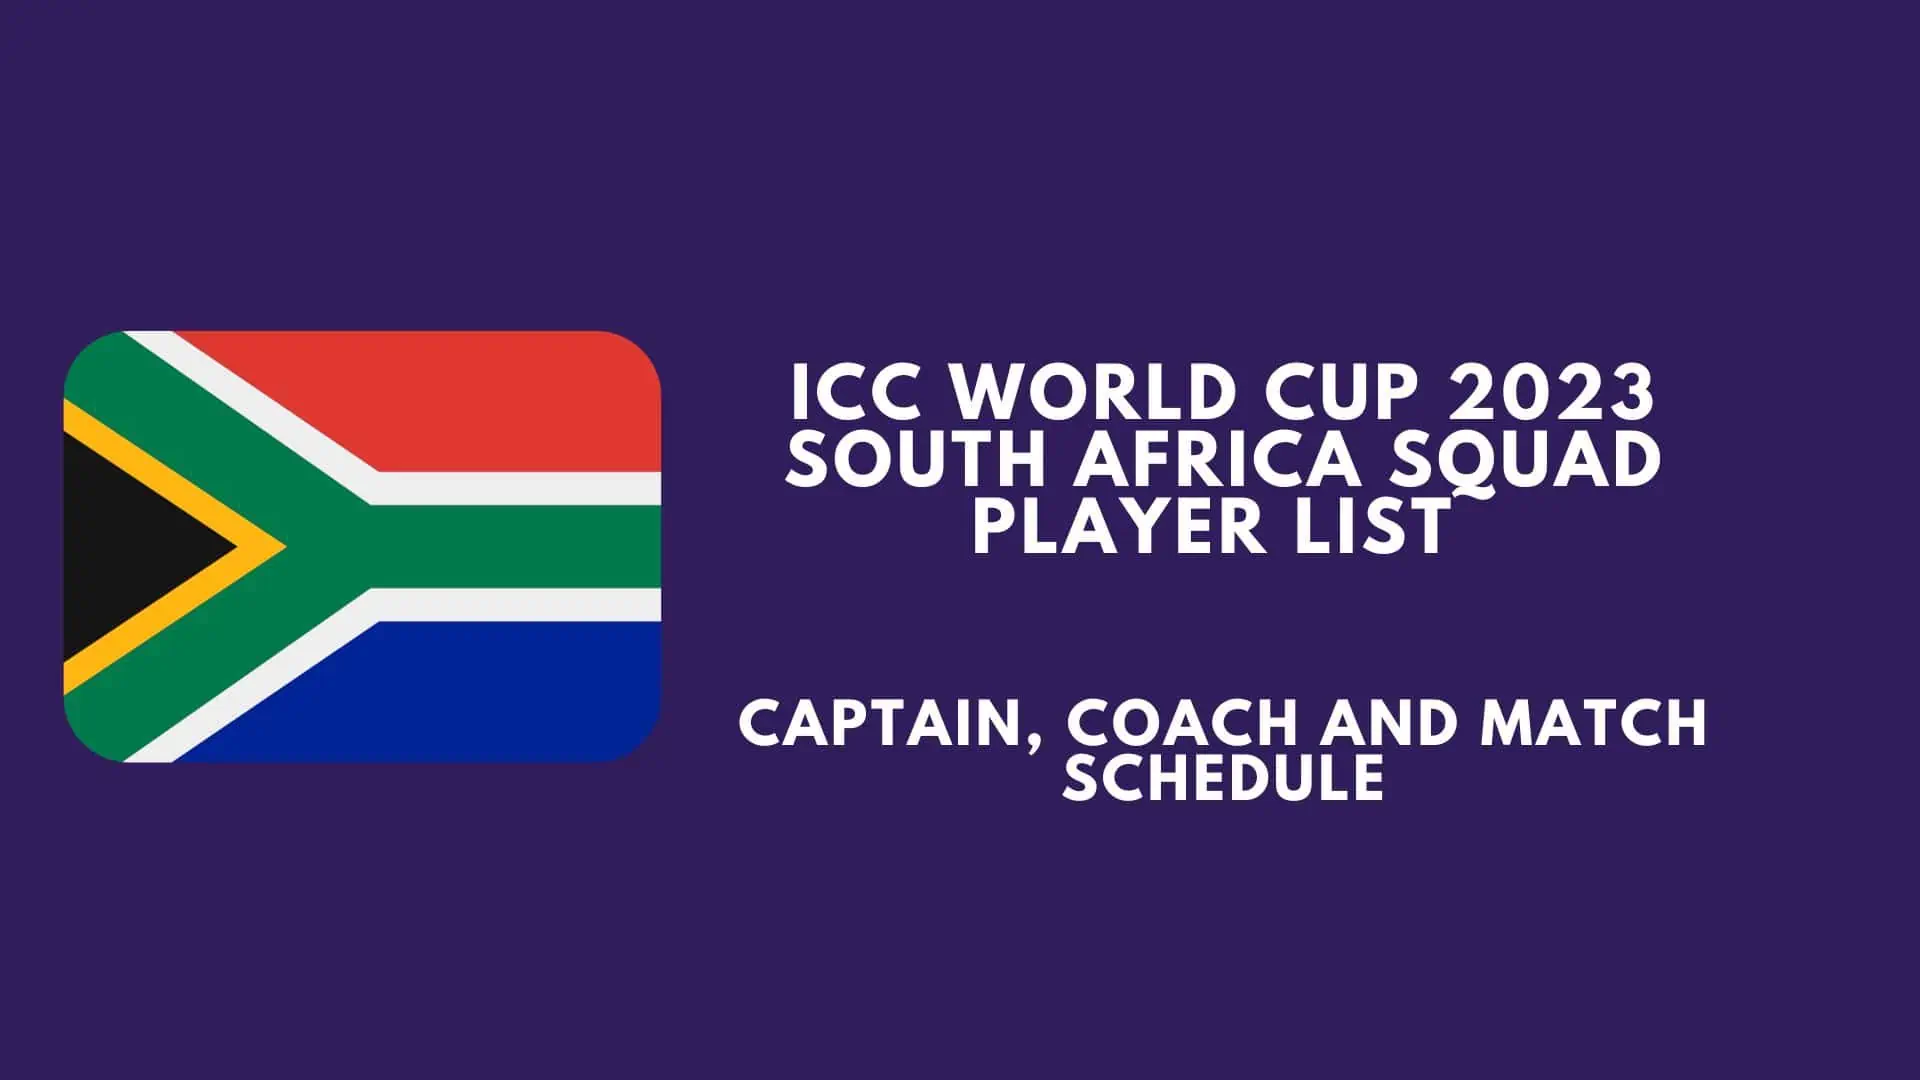 ICC World Cup 2023 South Africa Squad Player List, Captain, Coach and Match Schedule